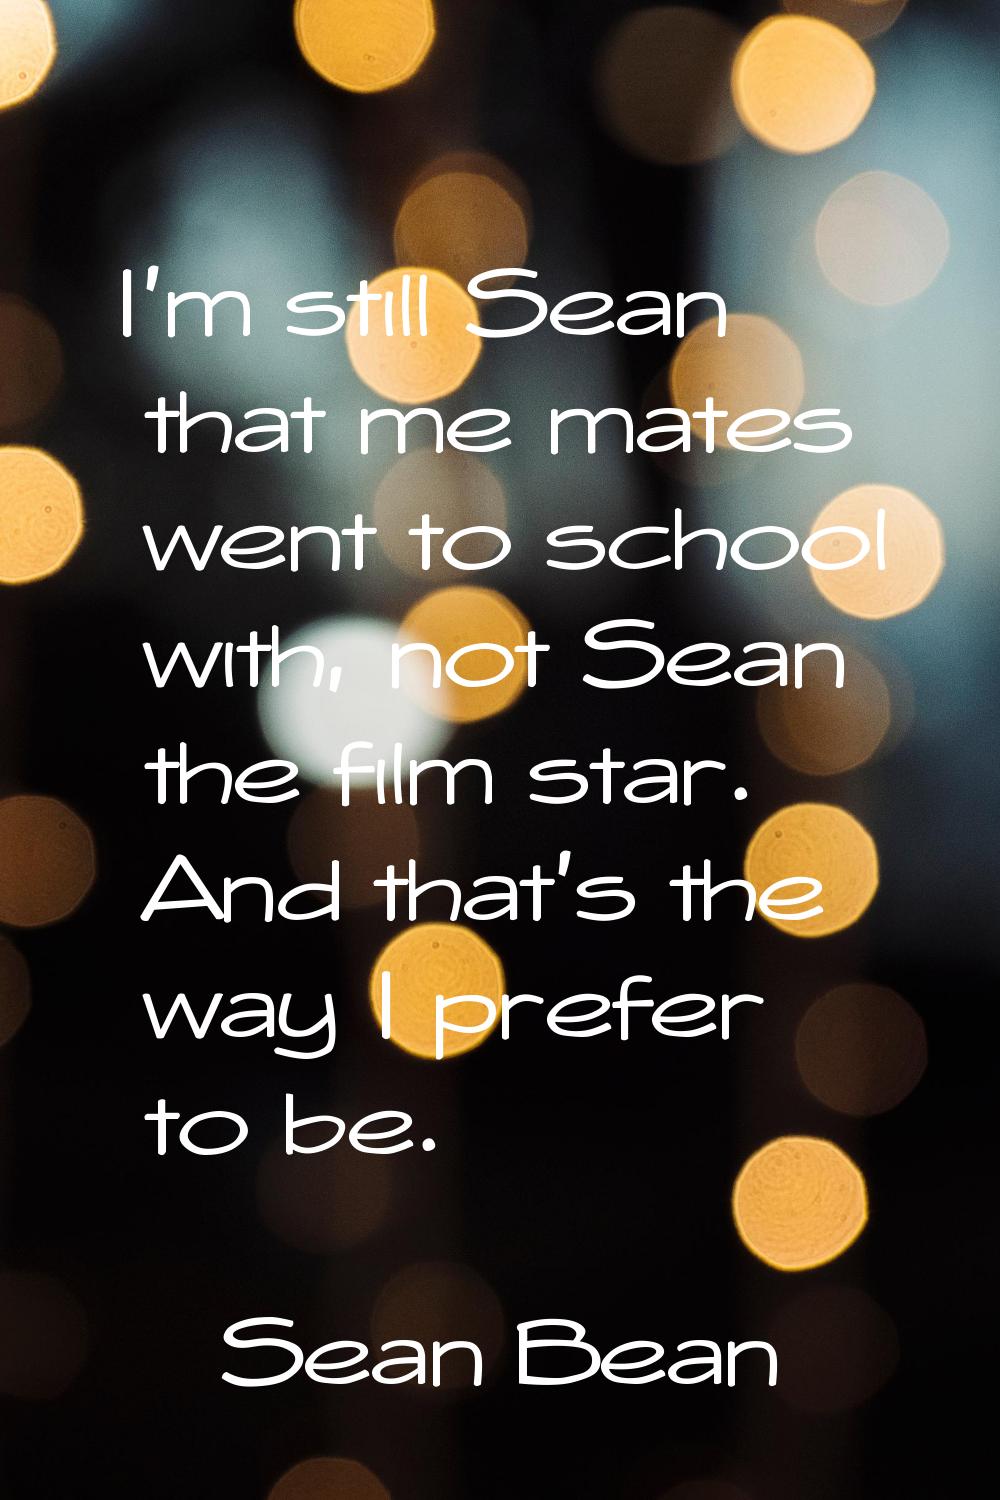 I'm still Sean that me mates went to school with, not Sean the film star. And that's the way I pref